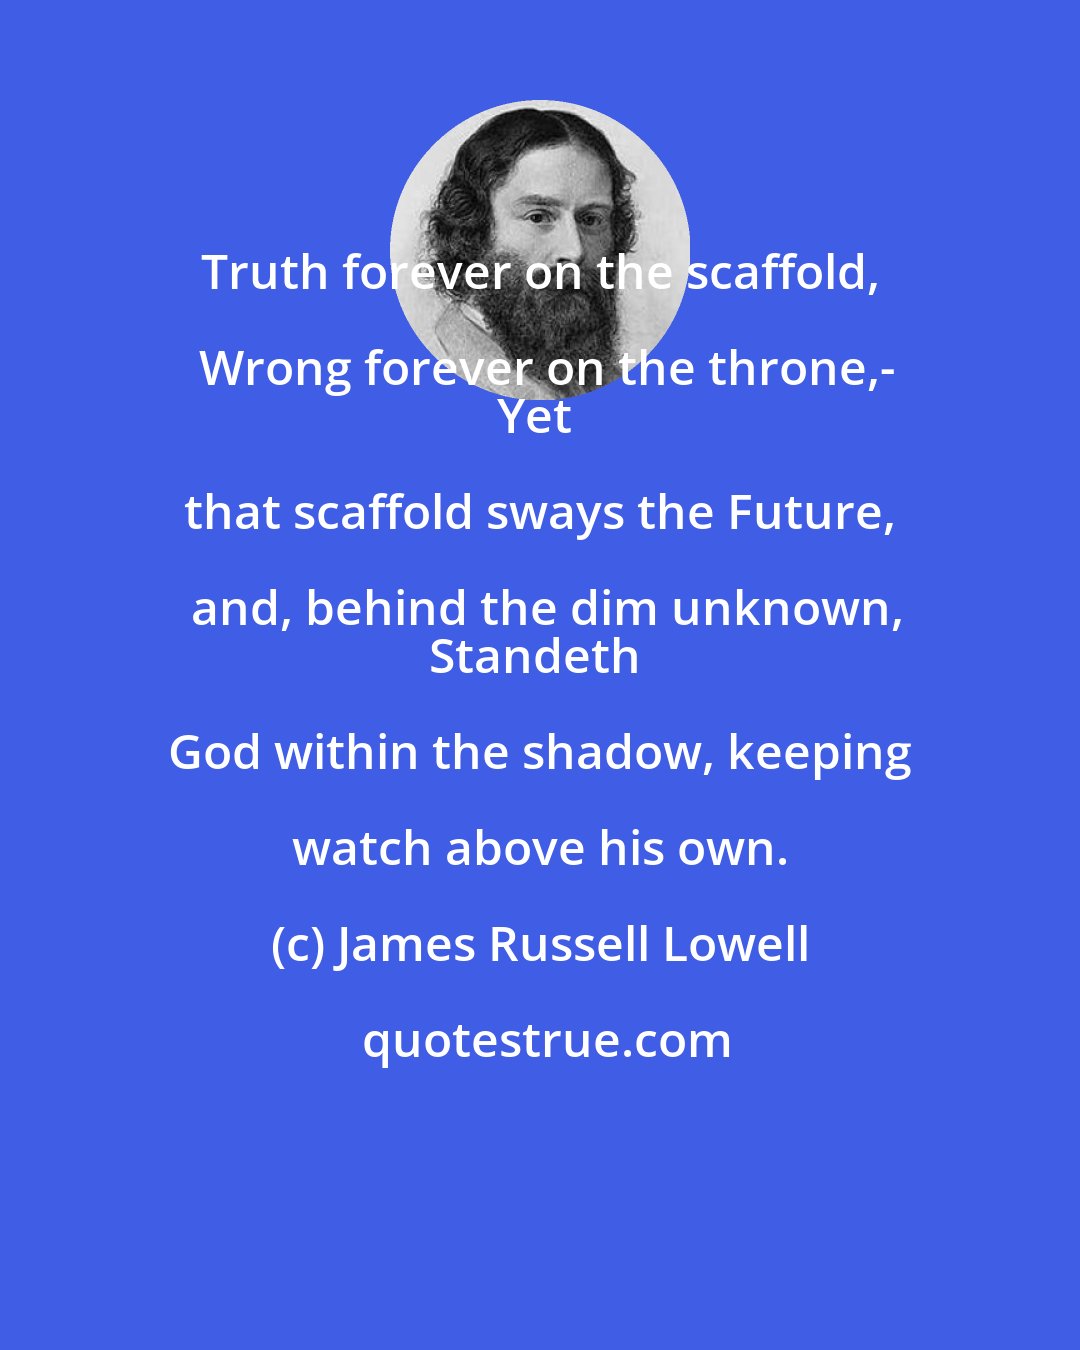 James Russell Lowell: Truth forever on the scaffold, Wrong forever on the throne,-
Yet that scaffold sways the Future, and, behind the dim unknown,
Standeth God within the shadow, keeping watch above his own.